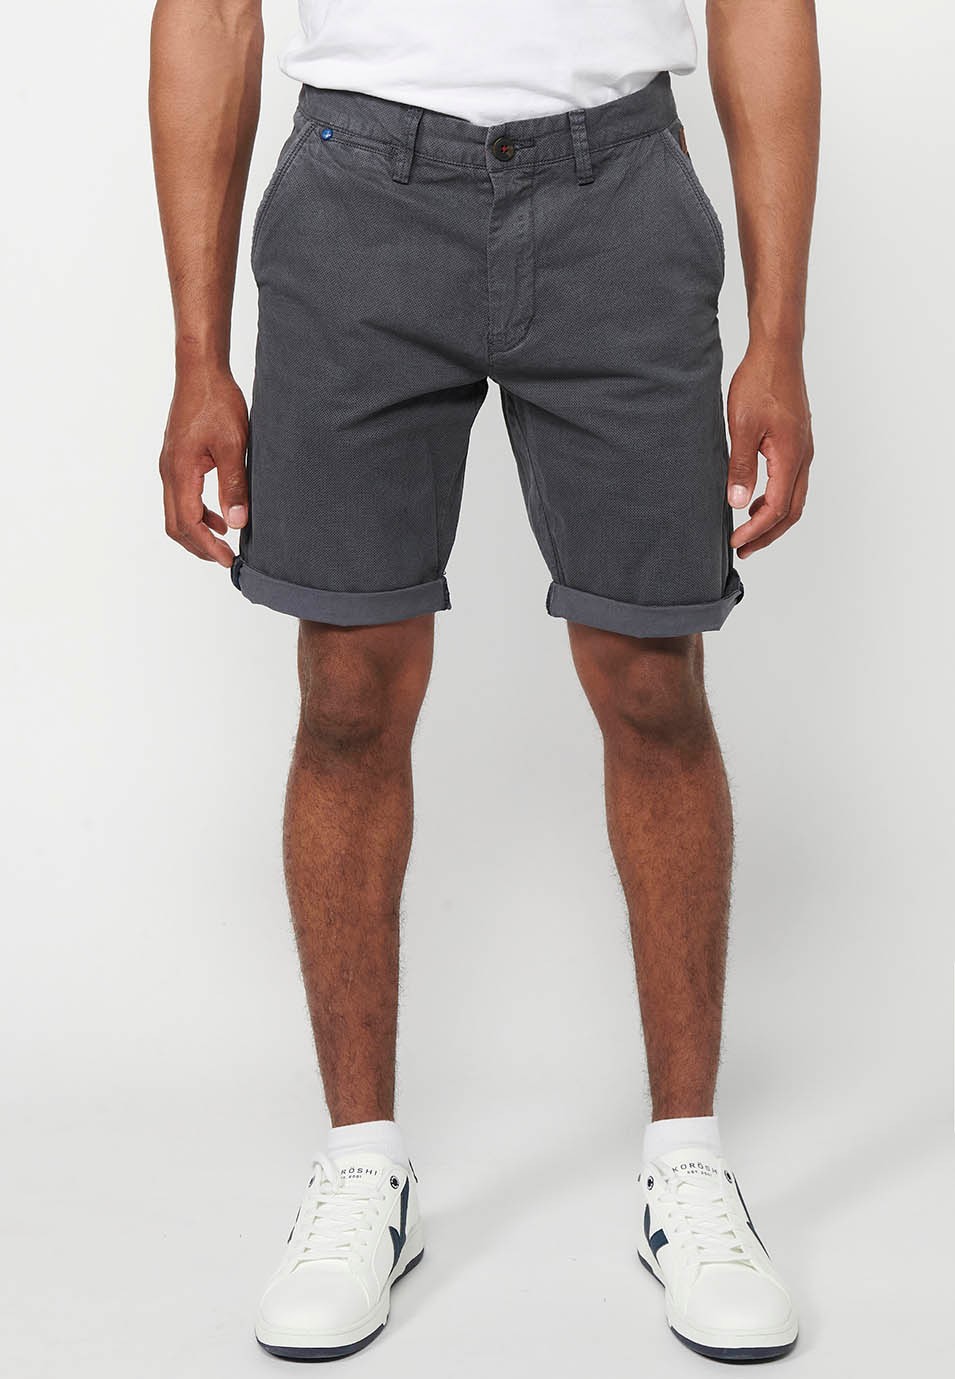 Bermuda Chino Shorts with Turn-Up Finish with Front Zipper and Button Closure with Four Pockets in Gray for Men